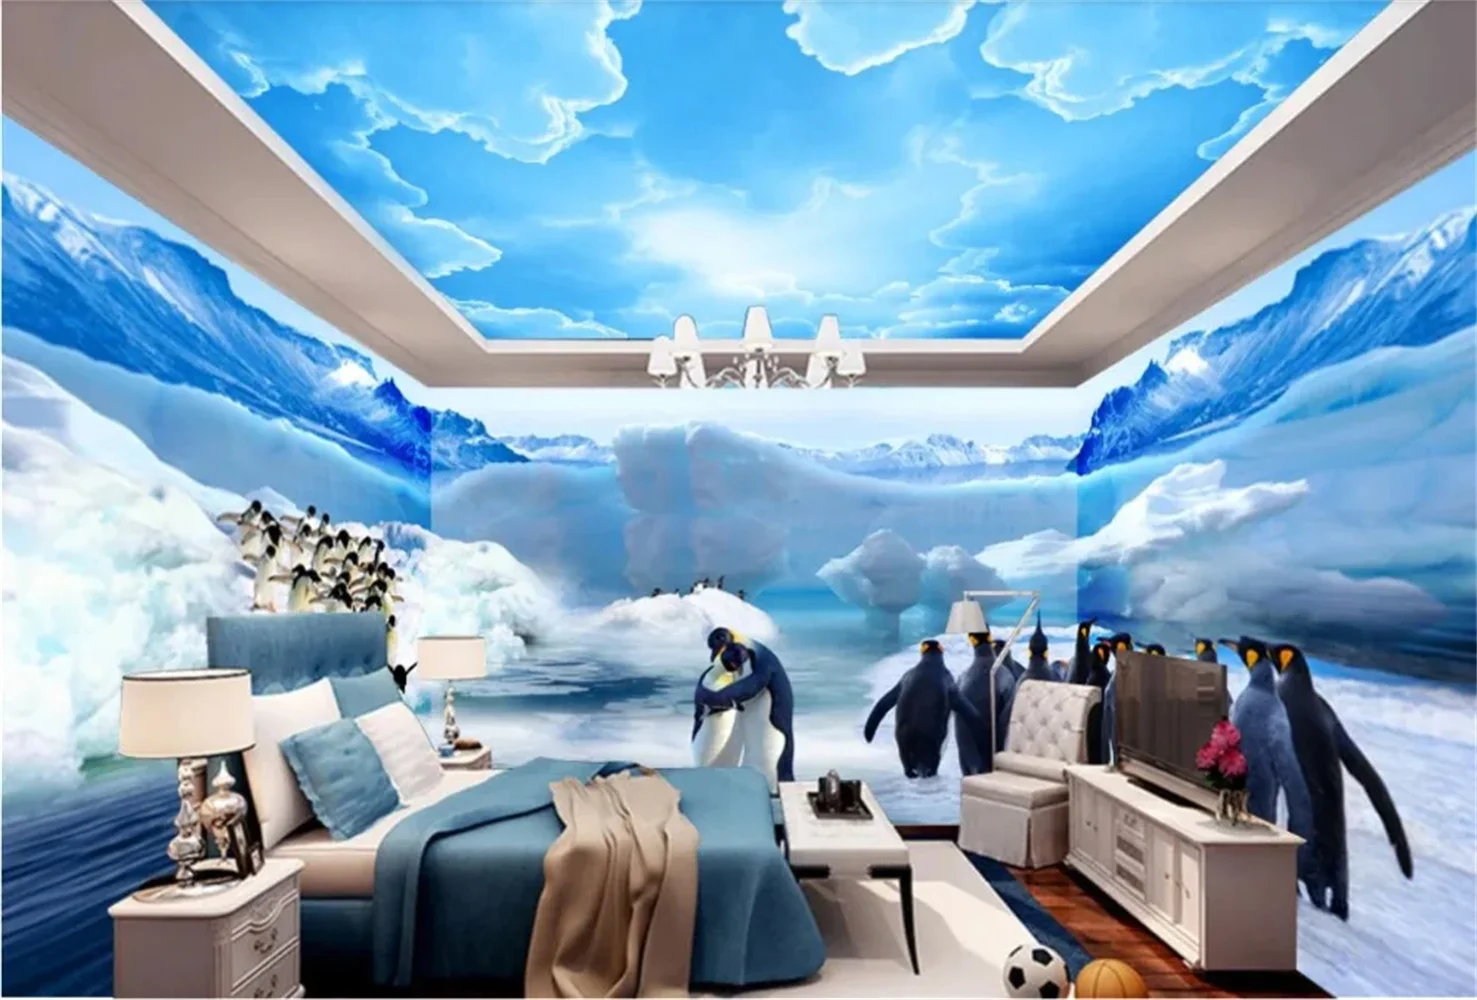 

beibehang Custom Large Mural Wallpaper 3D Antarctic Penguin Glacier World Theme House Wall papel de pared wall papers home decor